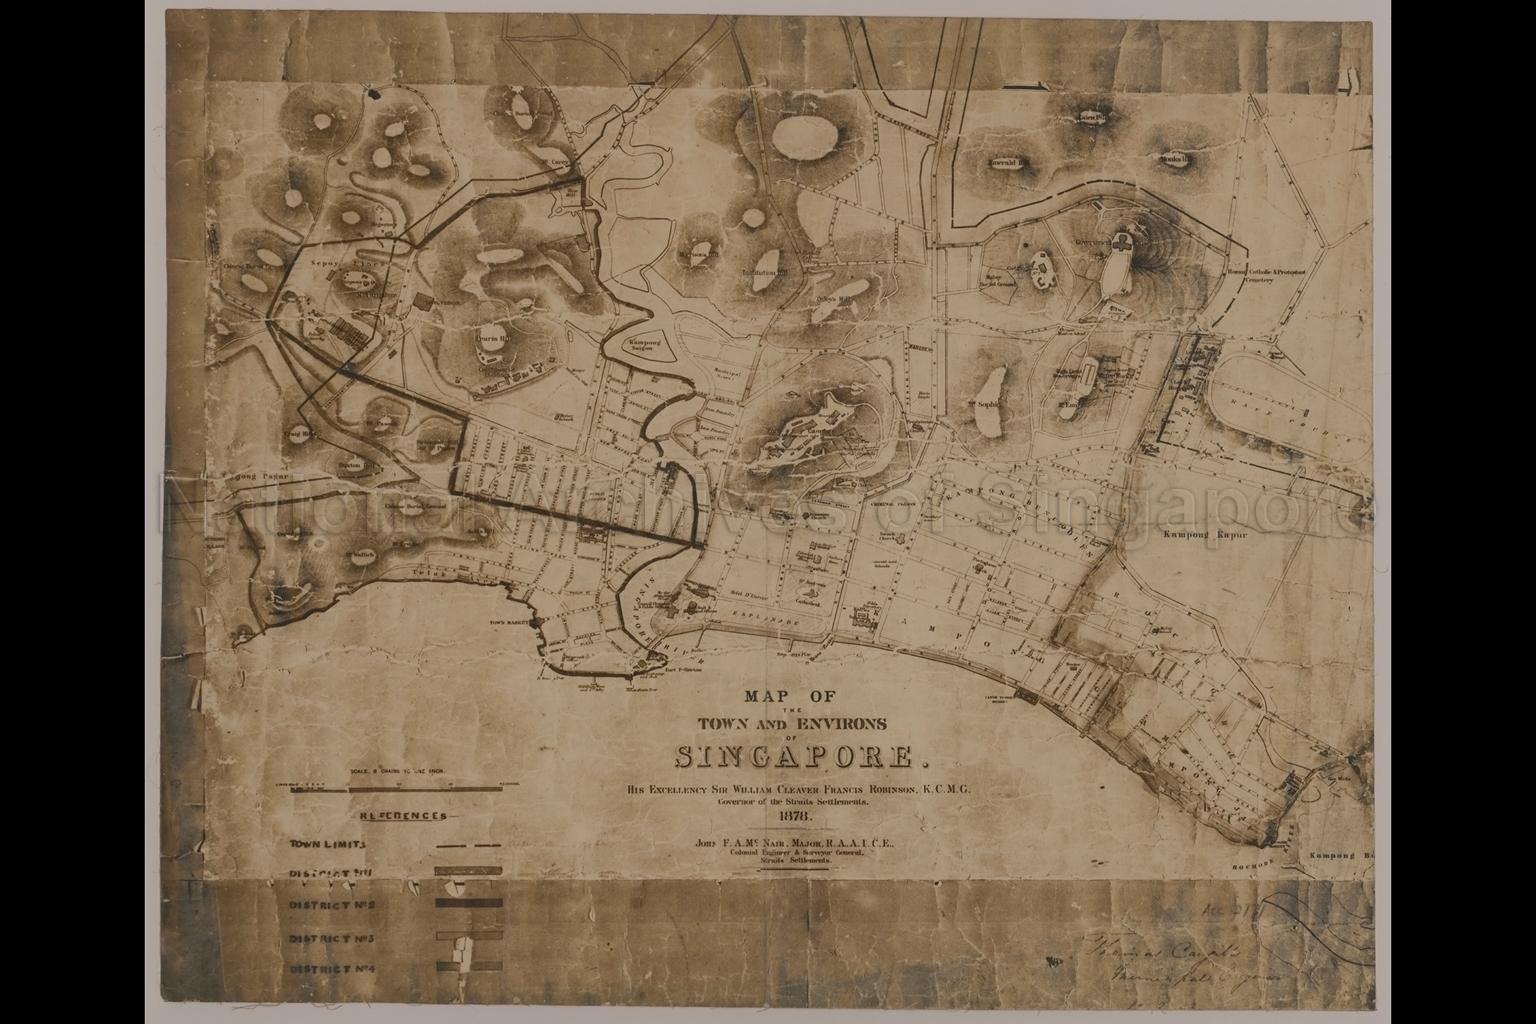 Map of the Town and Environs of Singapore